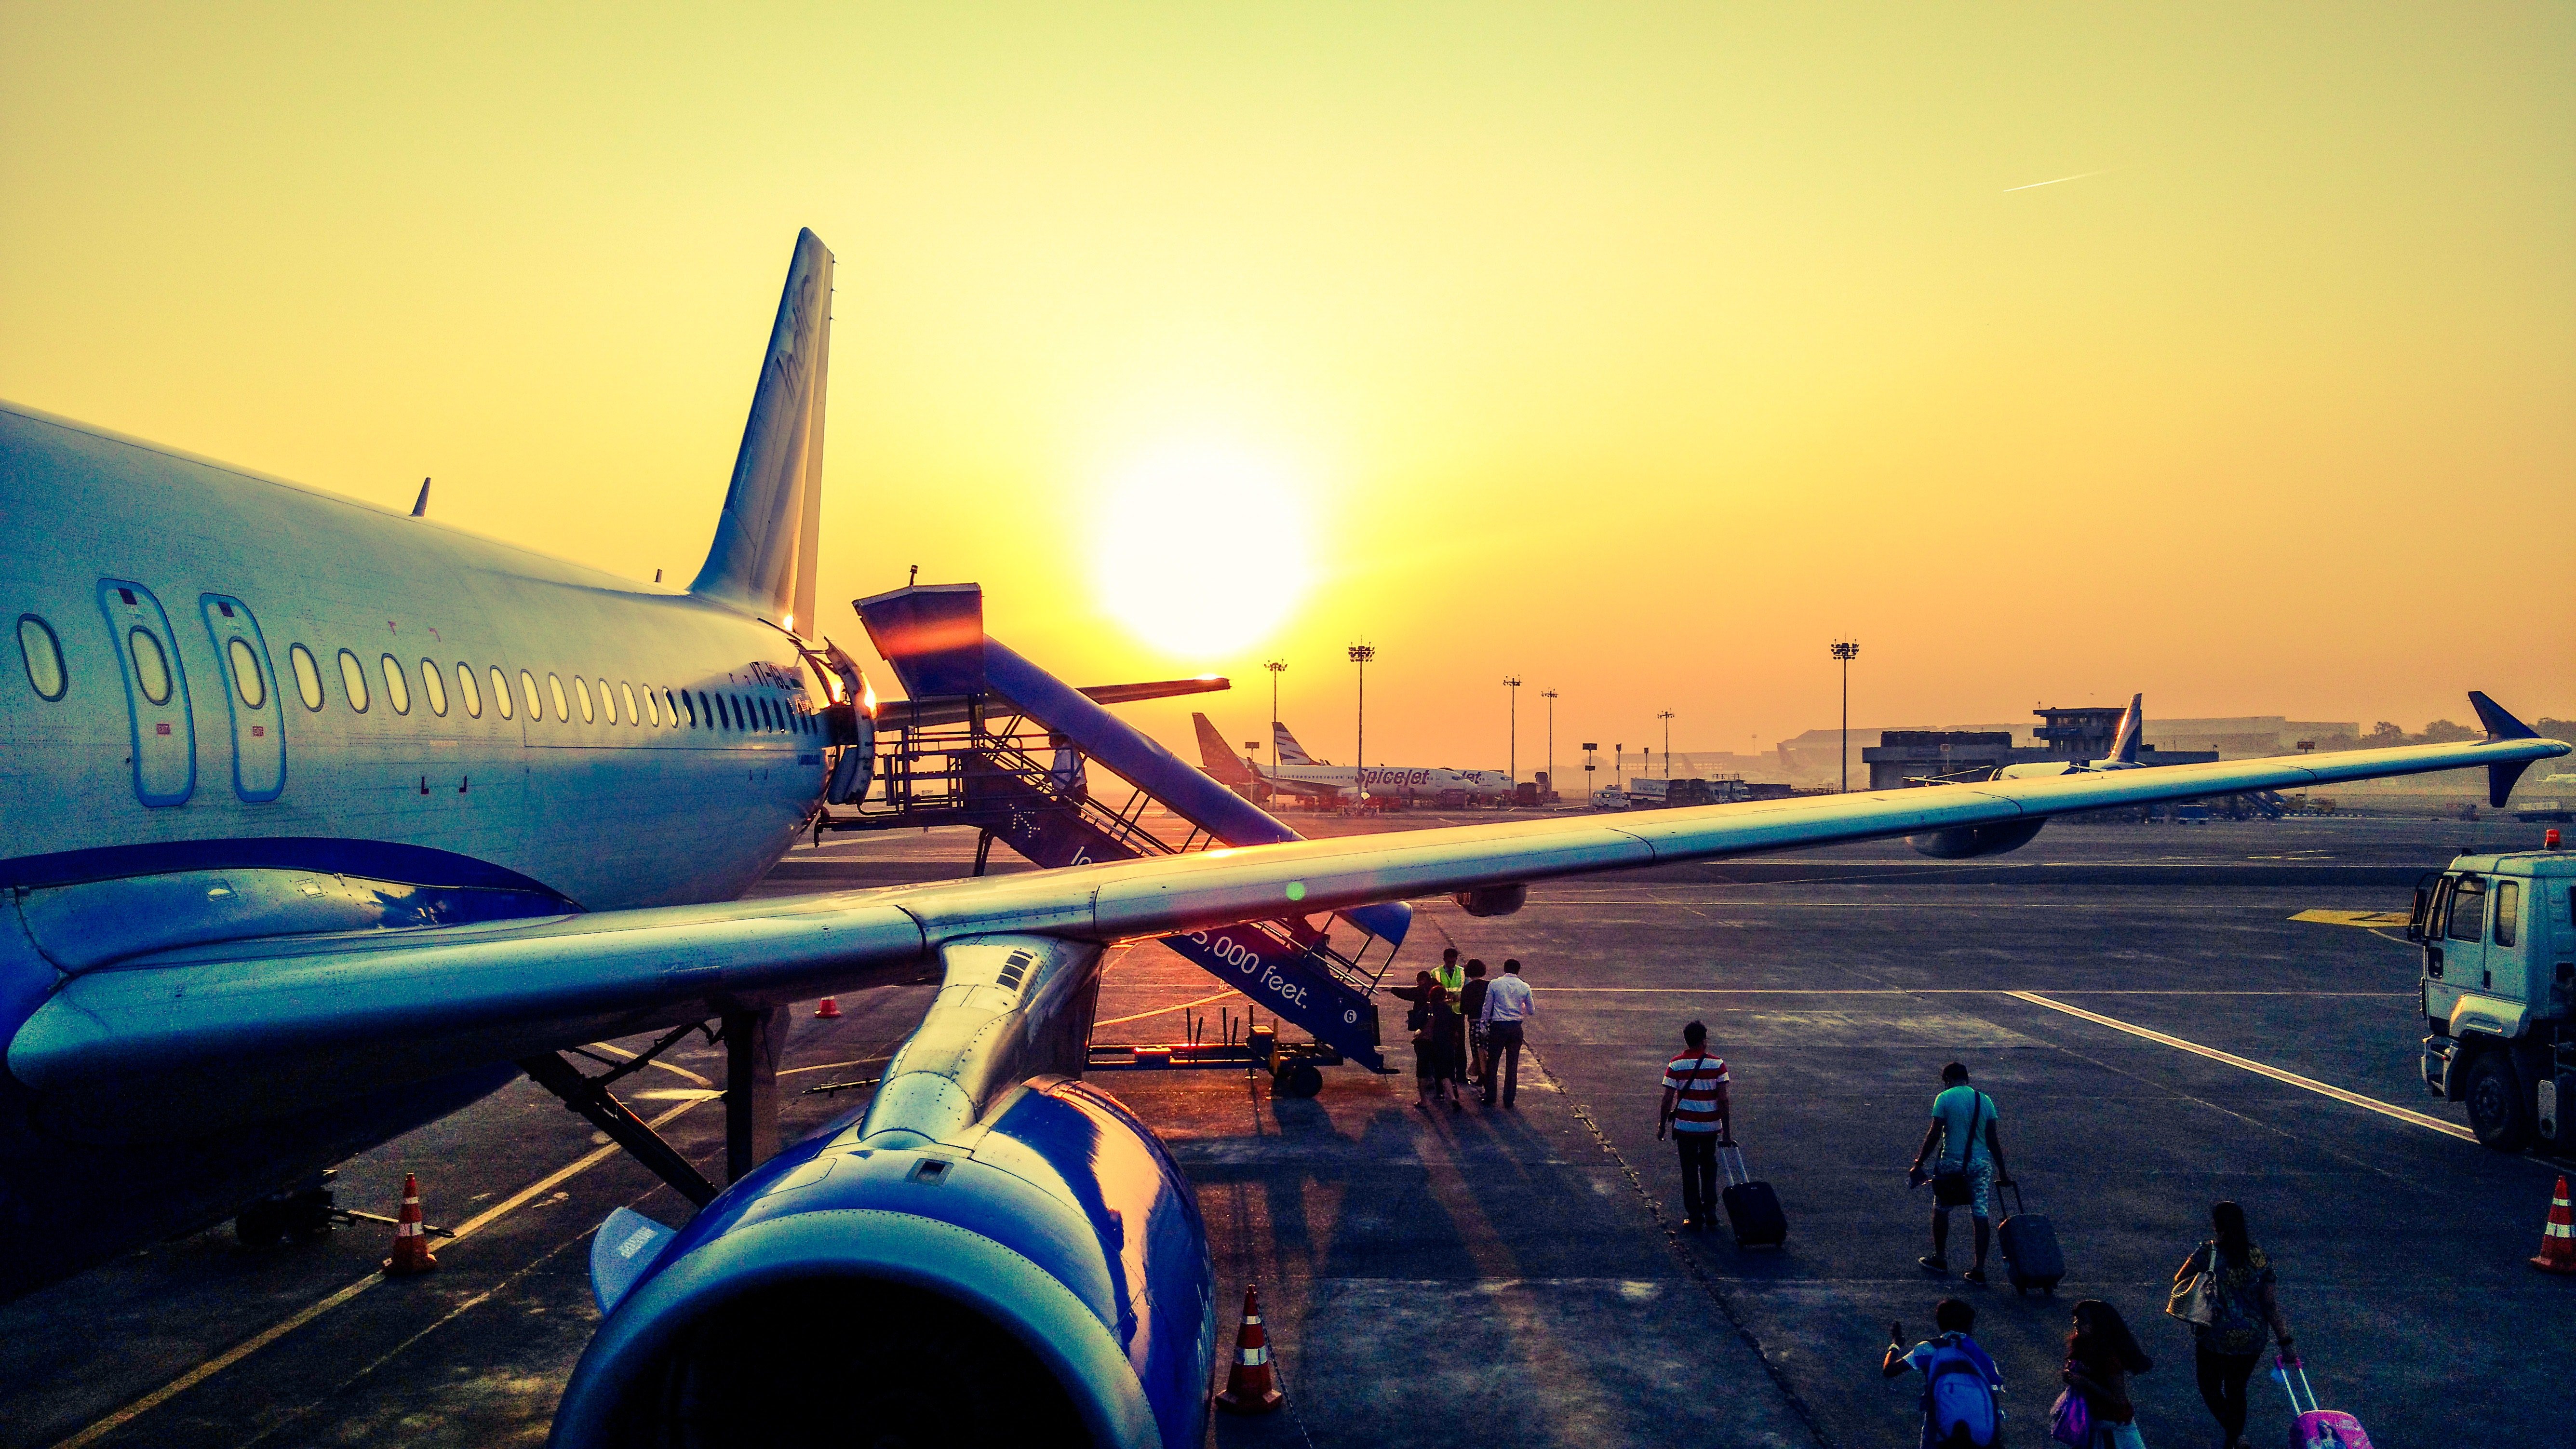 Lucas' dad decided to get Sinan a new ticket on the same flight as theirs. | Photo: Pexels